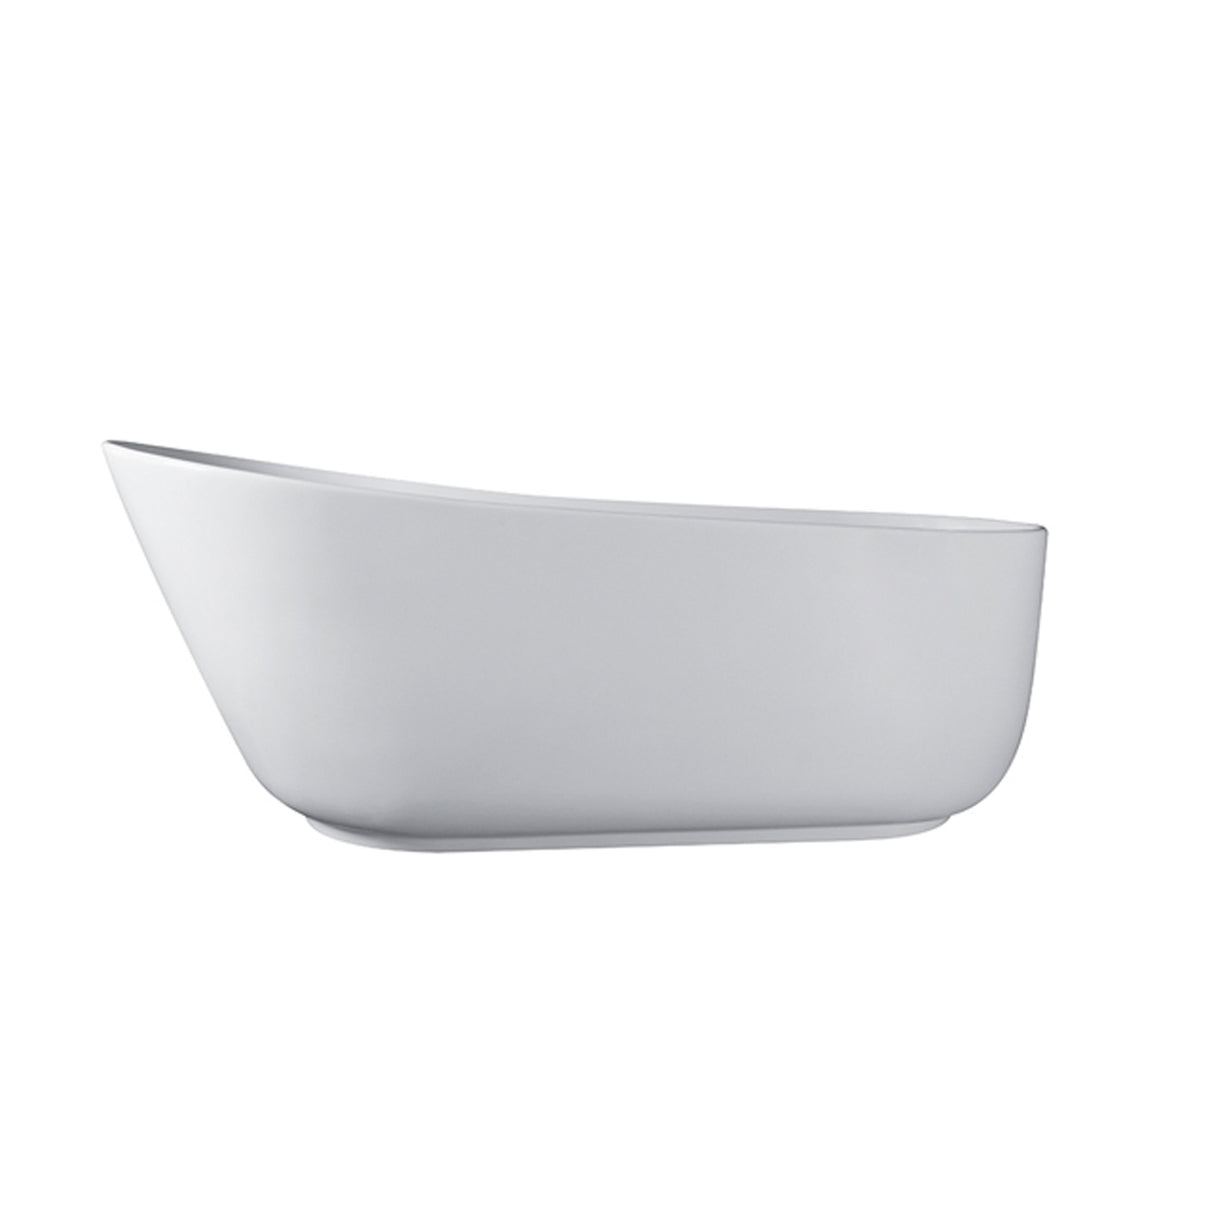 67-inch solid surface soaking bathtub with overflow for bathroom